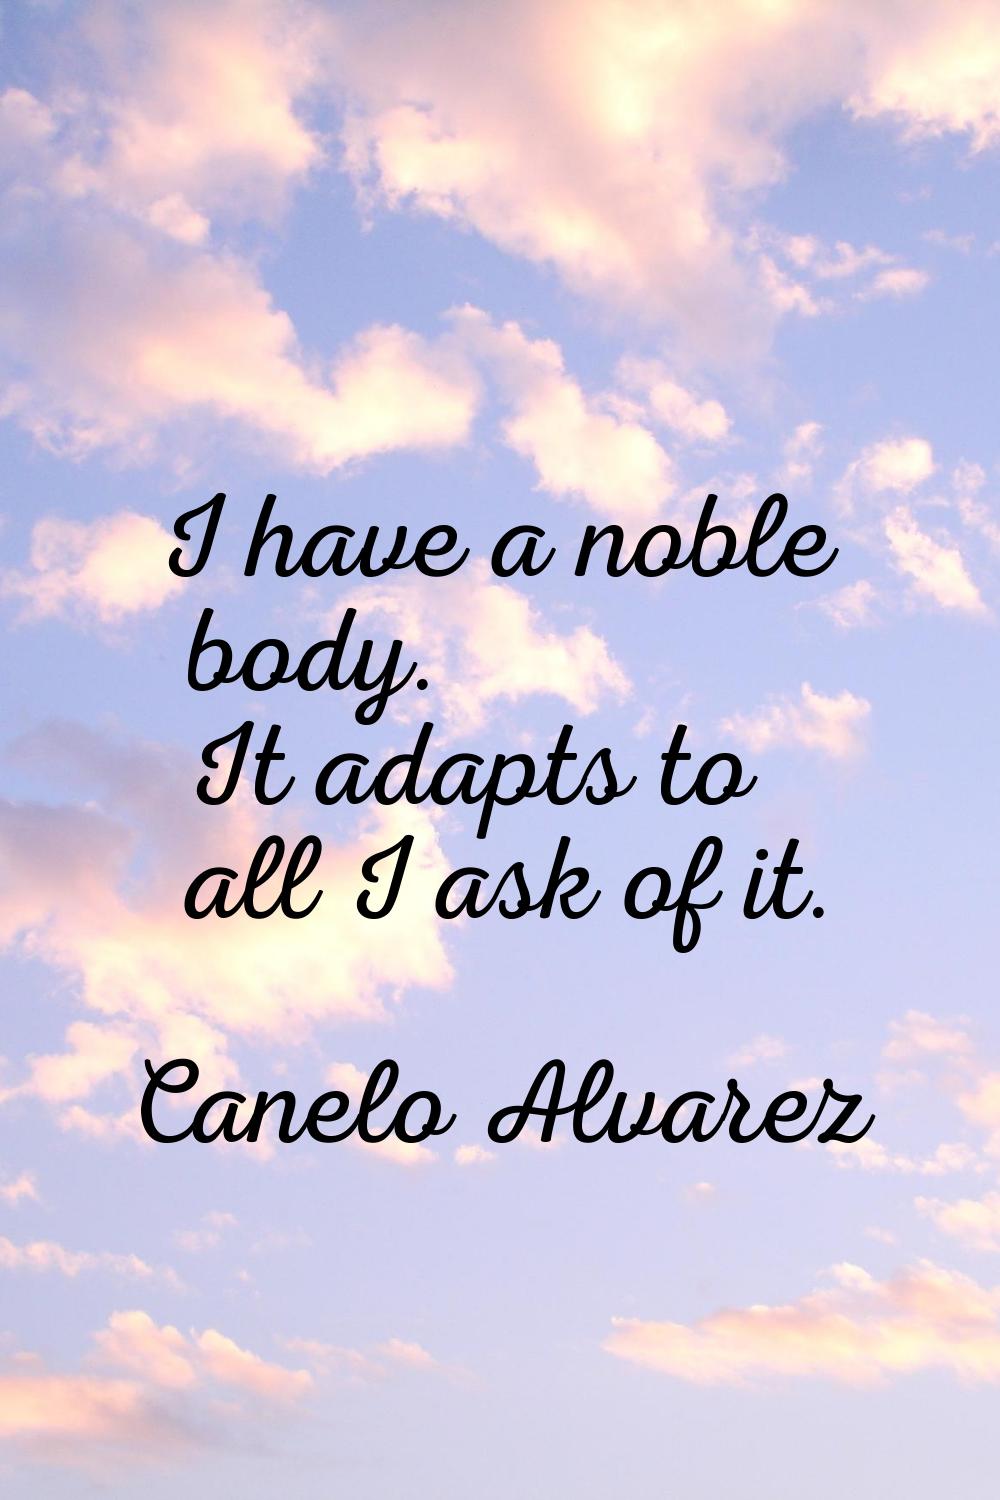 I have a noble body. It adapts to all I ask of it.